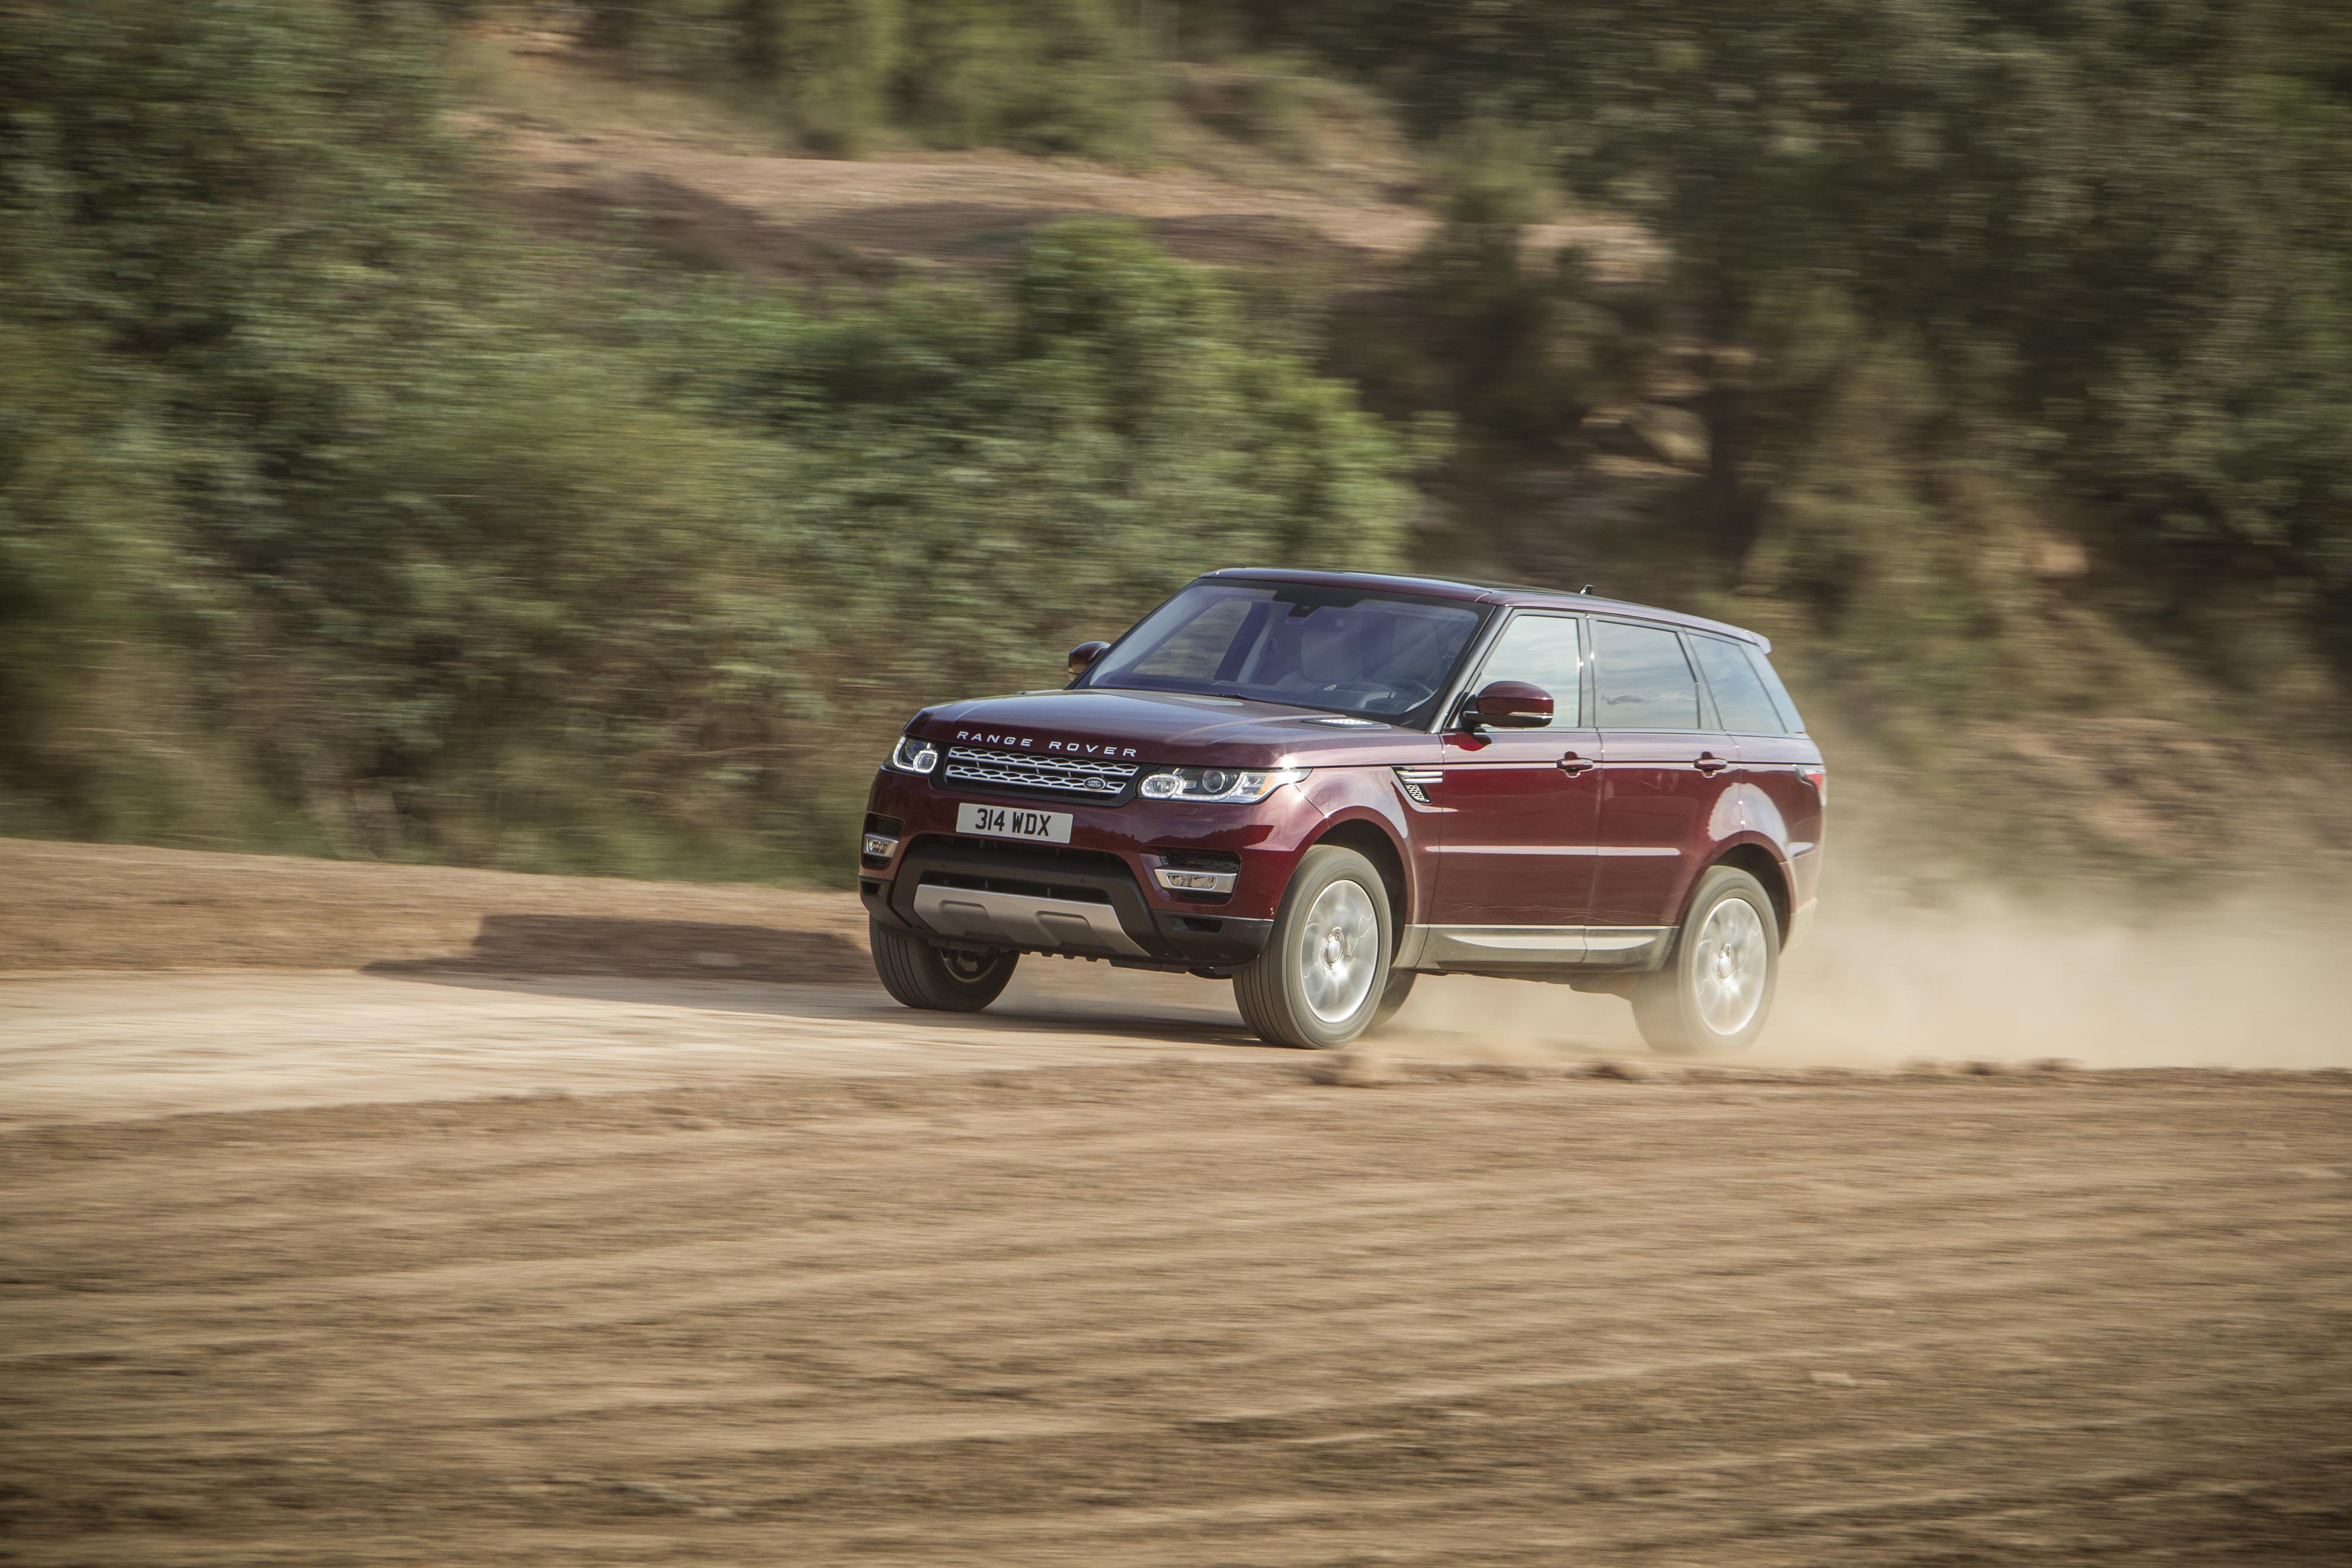 Oman motoring: Range Rover at the head of all terrain pack